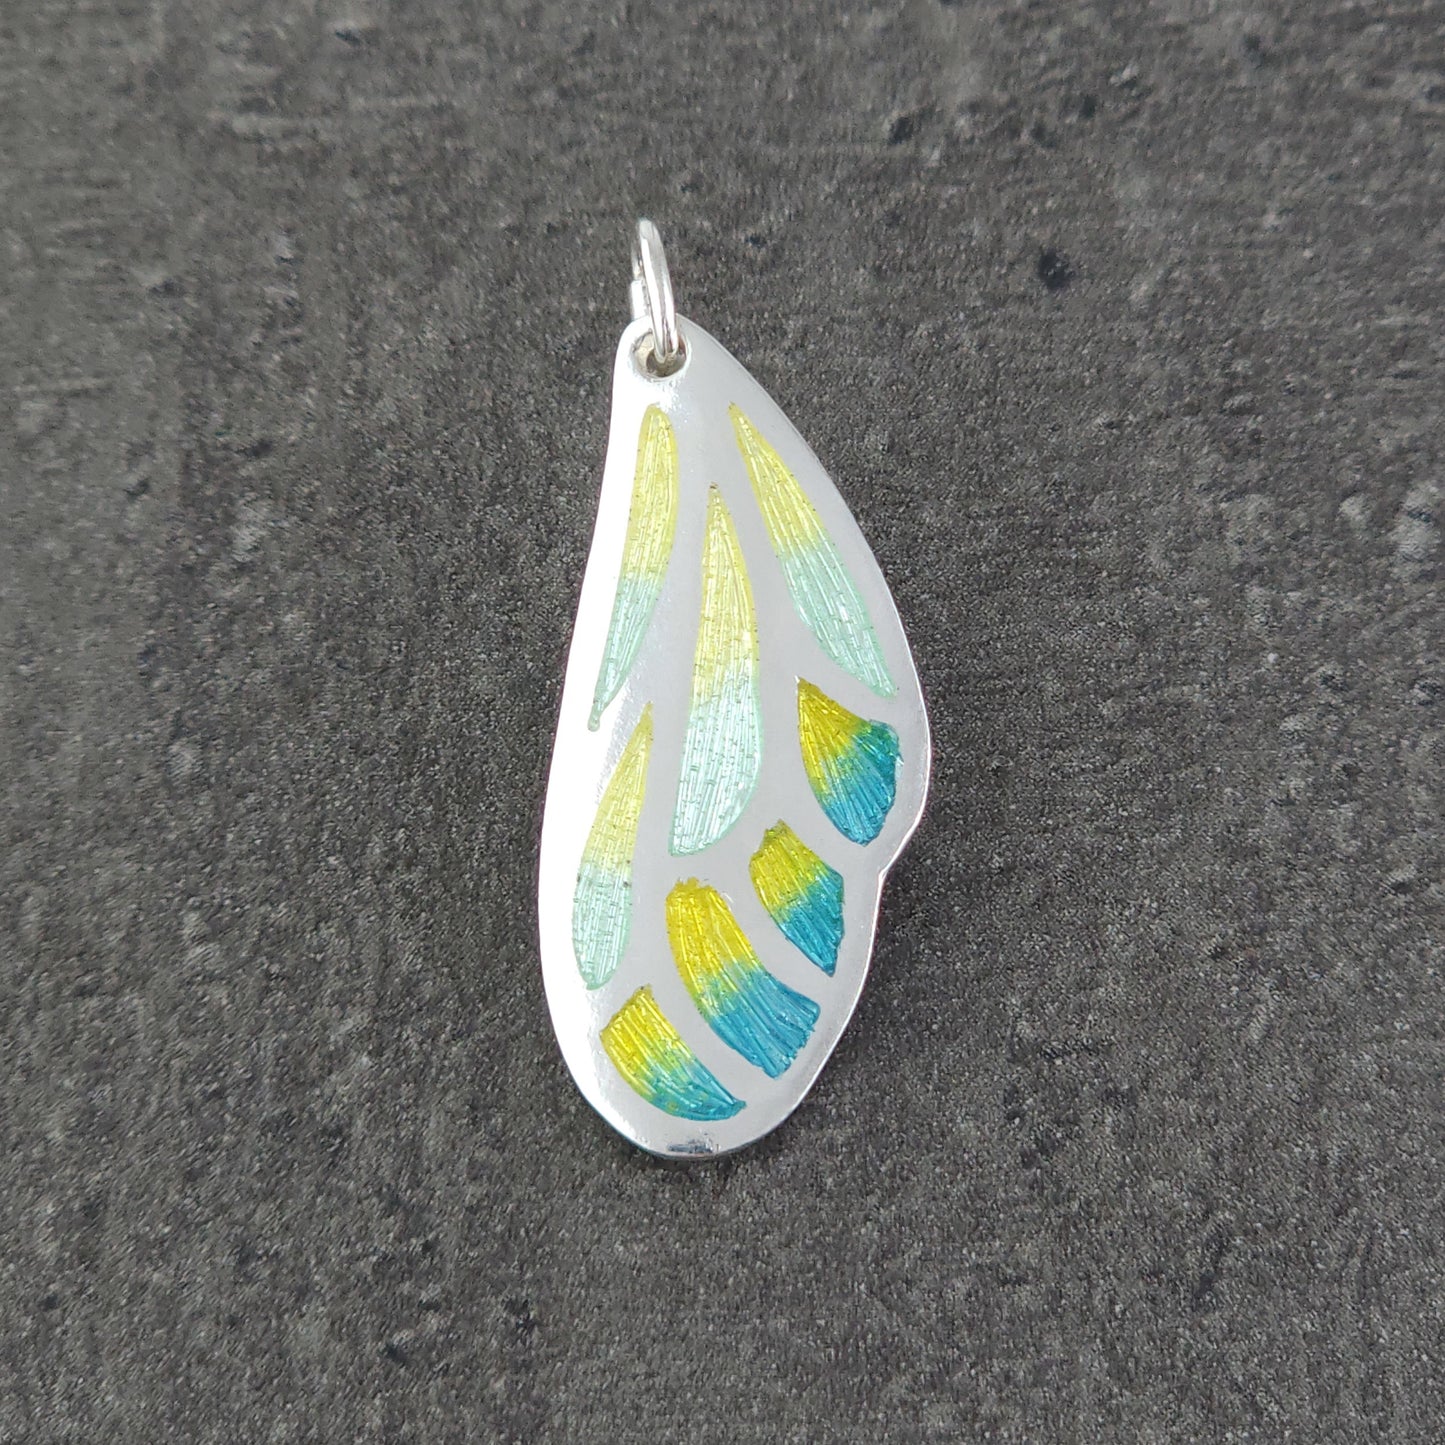 Butterfly Wing Yellow Aqua Champleve Silver Pendant